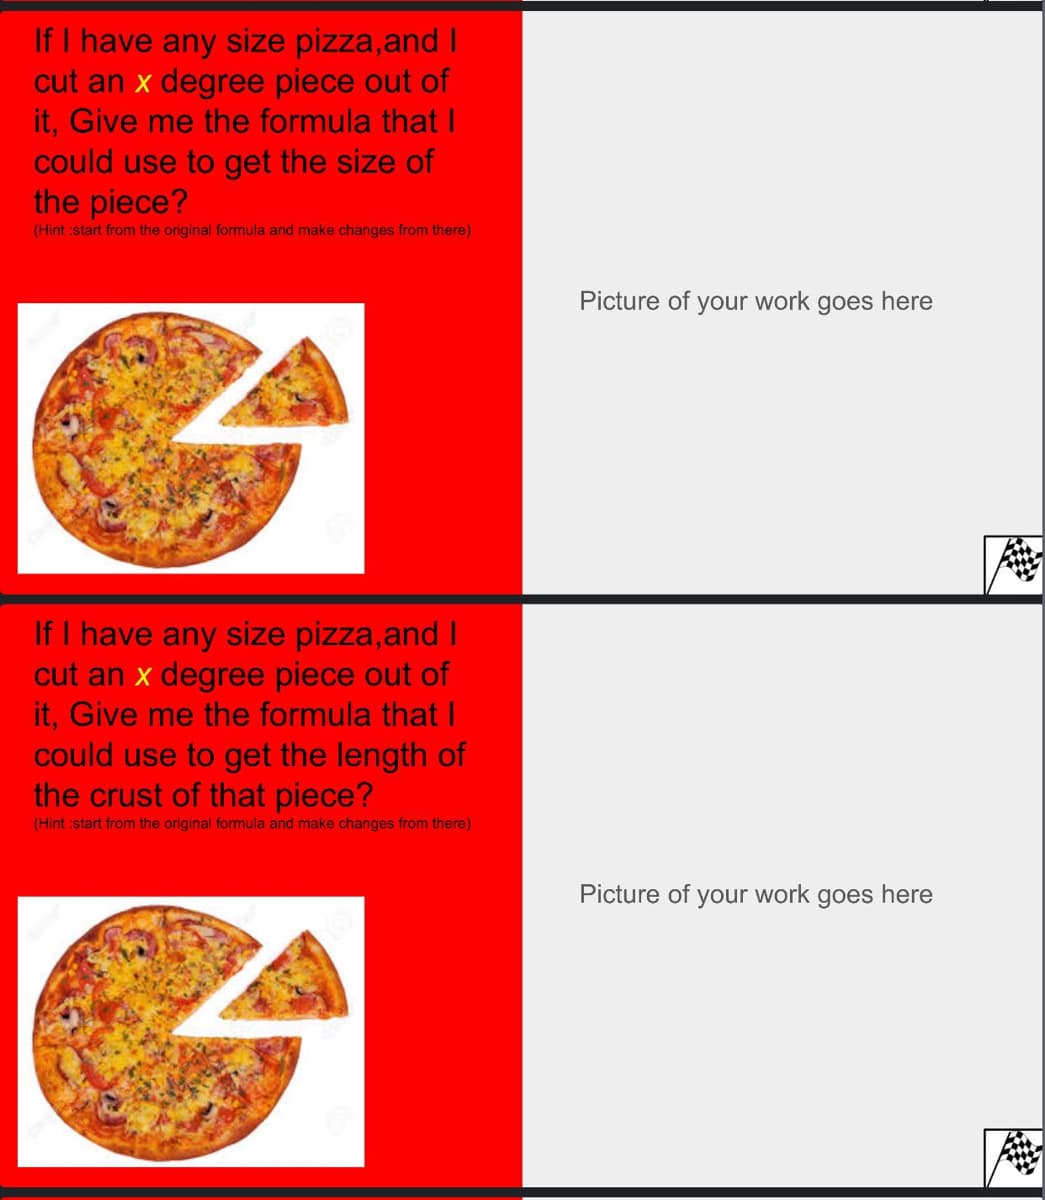 If I have any size pizza, and I
cut an x degree piece out of
it, Give me the formula that I
could use to get the size of
the piece?
(Hint :start from the original formula and make changes from there)
If I have any size pizza,and I
cut an x degree piece out of
it, Give me the formula that I
could use to get the length of
the crust of that piece?
(Hint :start from the original formula and make changes from there)
Picture of your work goes here
Picture of your work goes here
2000
Ane
He